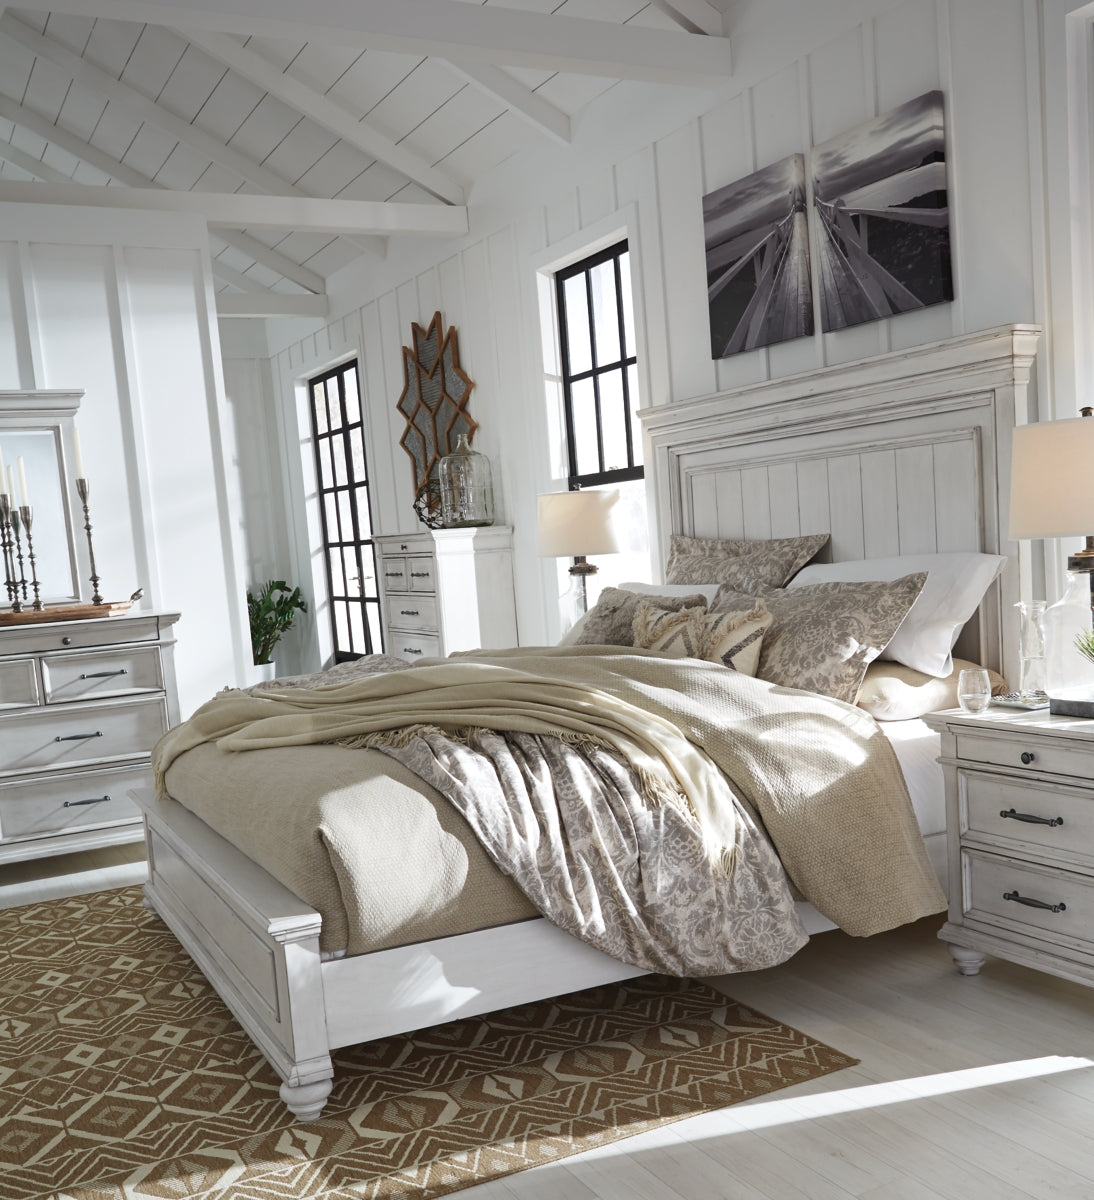 Kanwyn Queen Panel Bed